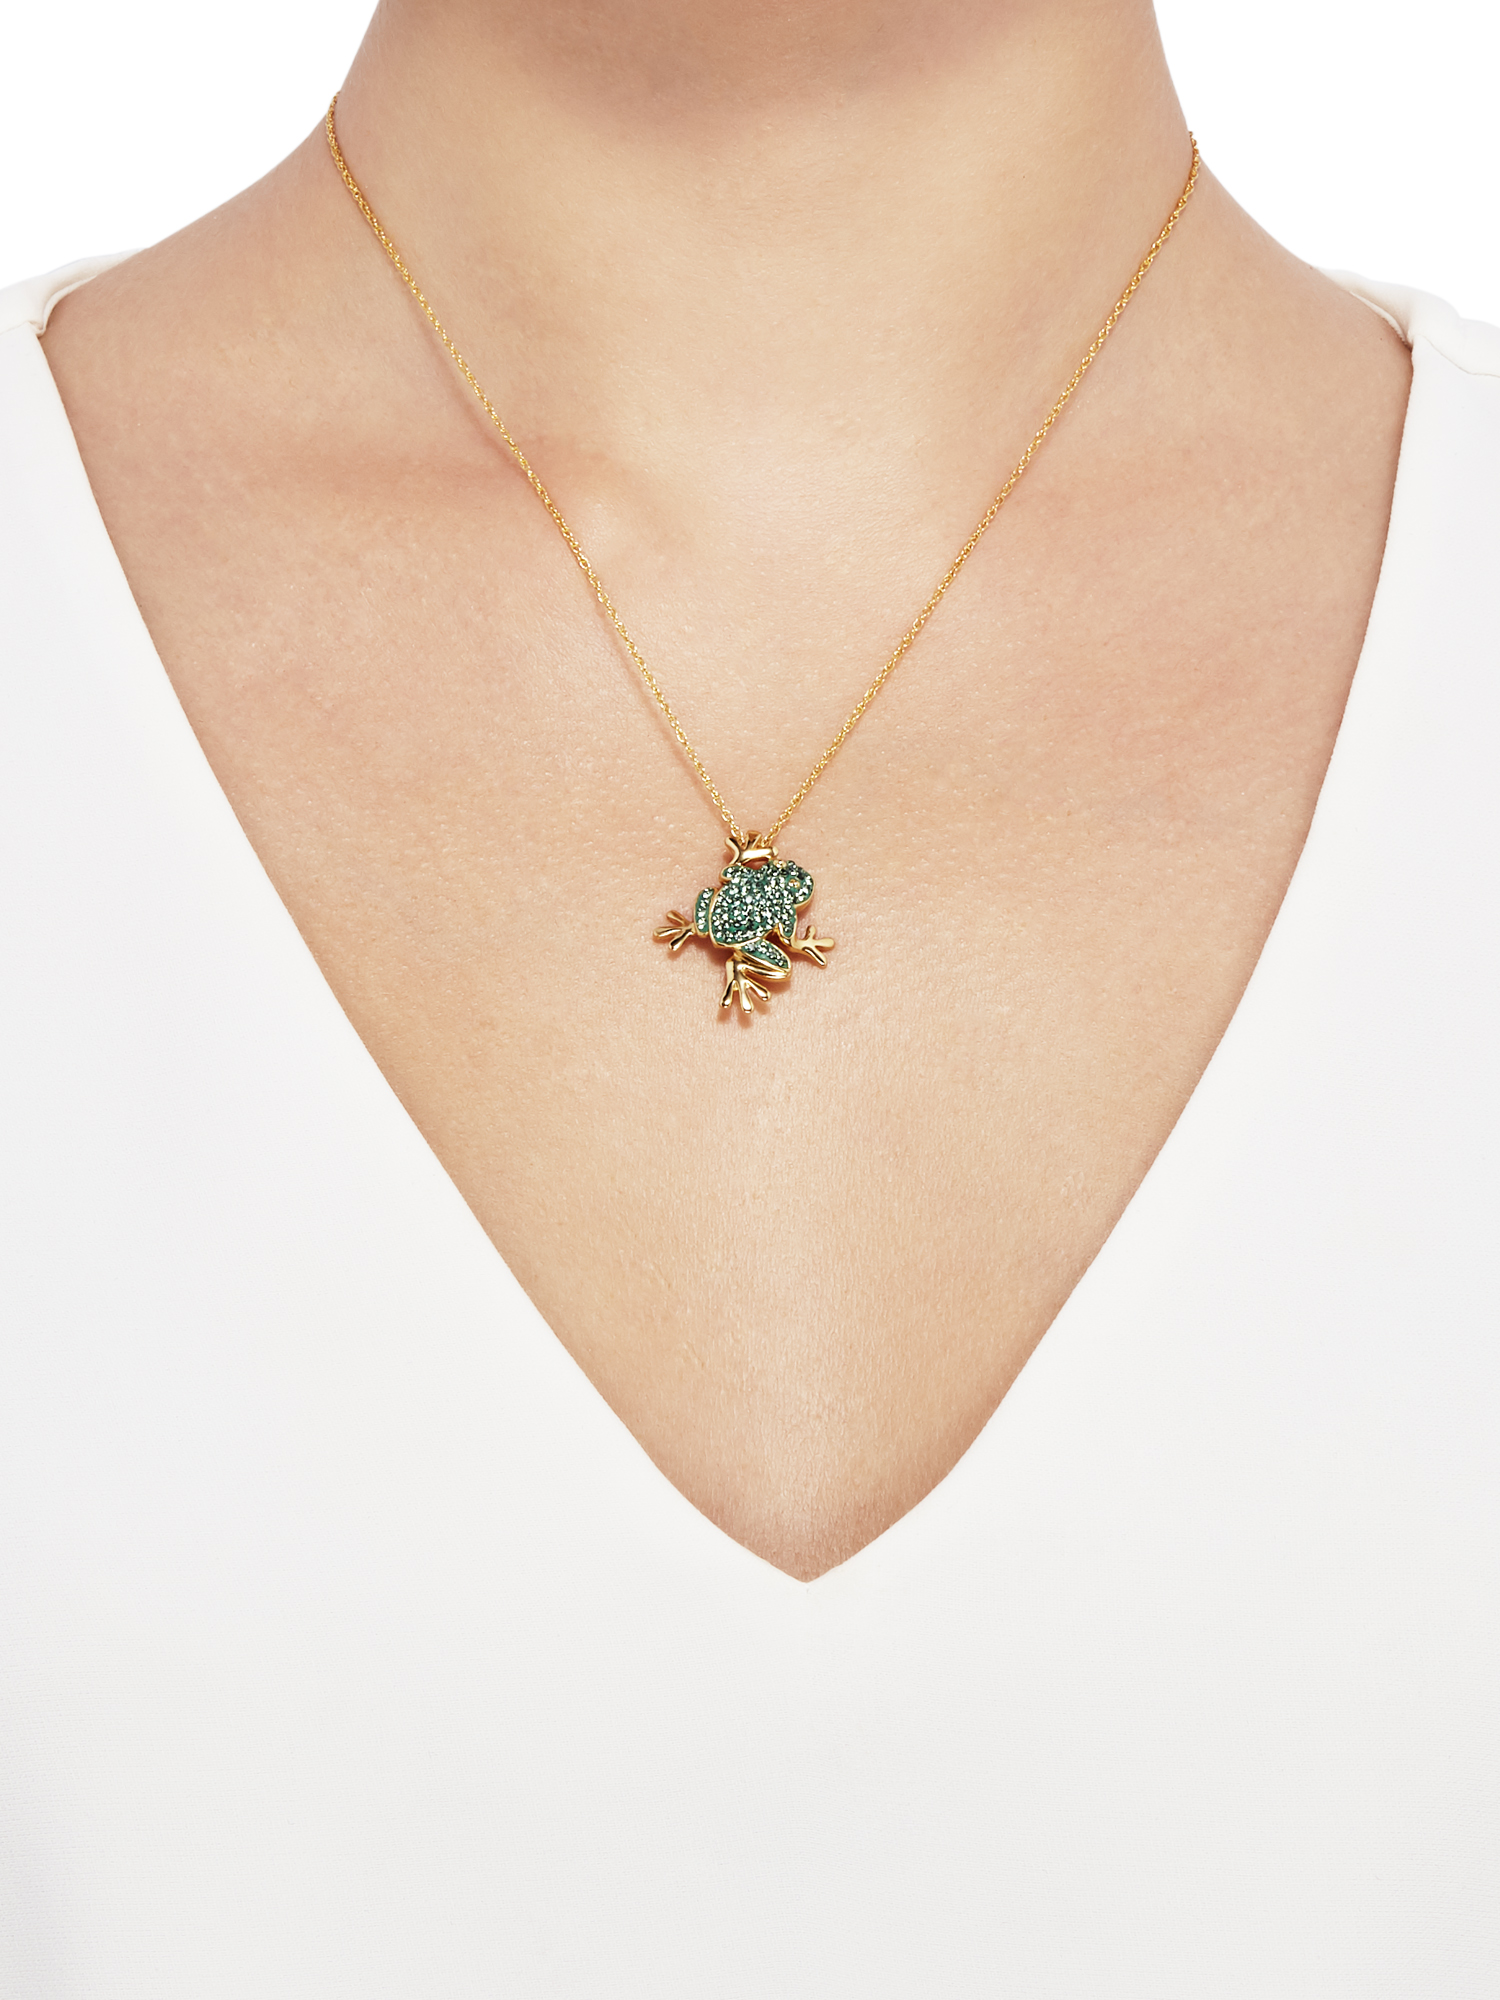 Brilliance Fine Jewelry 18kt Gold over Sterling Silver Frog Pendant made with Crystals, 18" Necklace - image 2 of 4